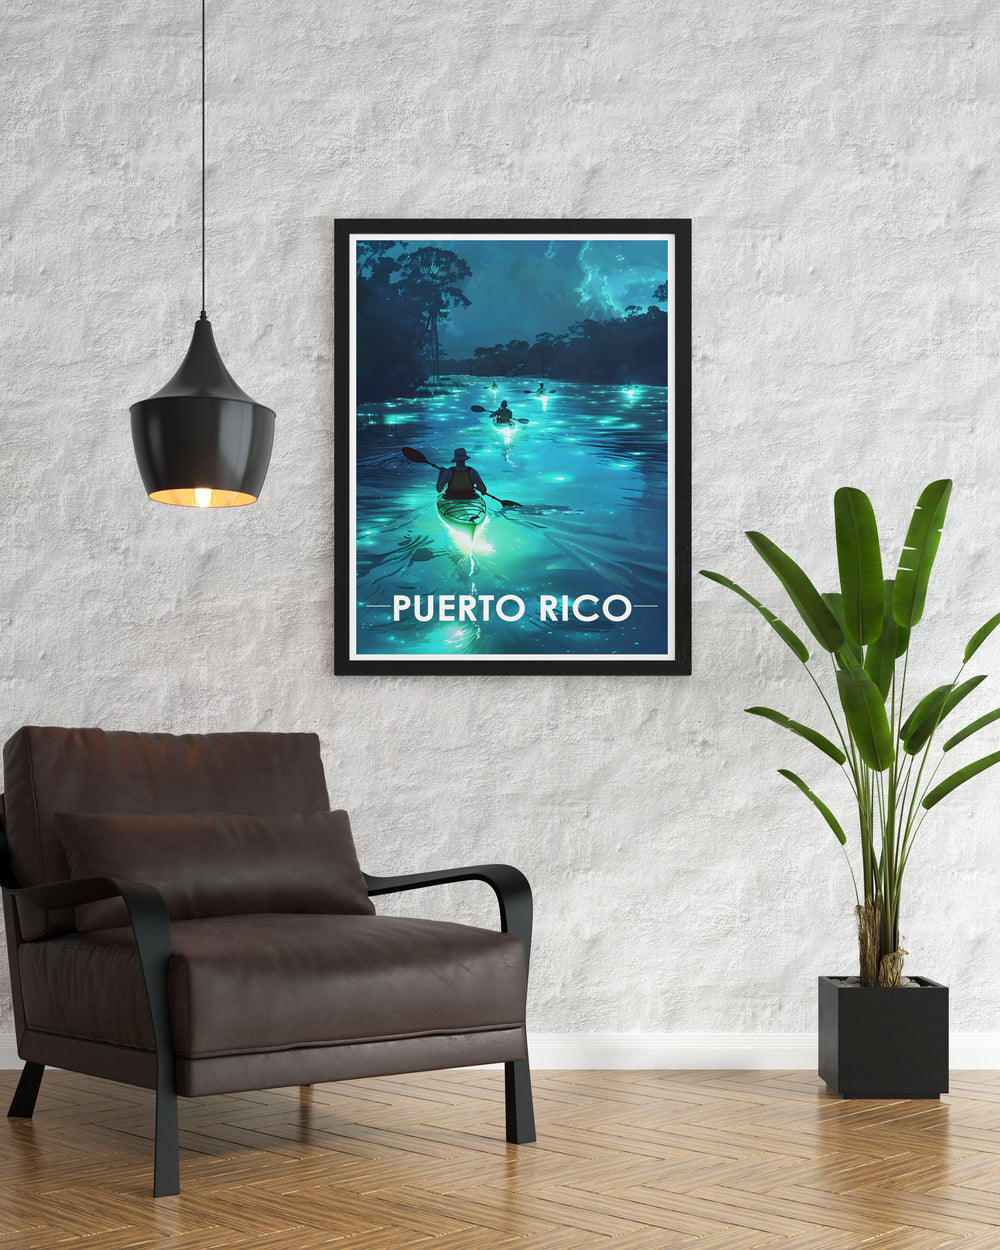 Stunning Arecibo vintage poster highlighting the mesmerizing Bioluminescent Lakes. Ideal as a personalized gift or unique art piece, this travel poster print brings the magical beauty of Arecibo to life, perfect for any art lovers home or office space.